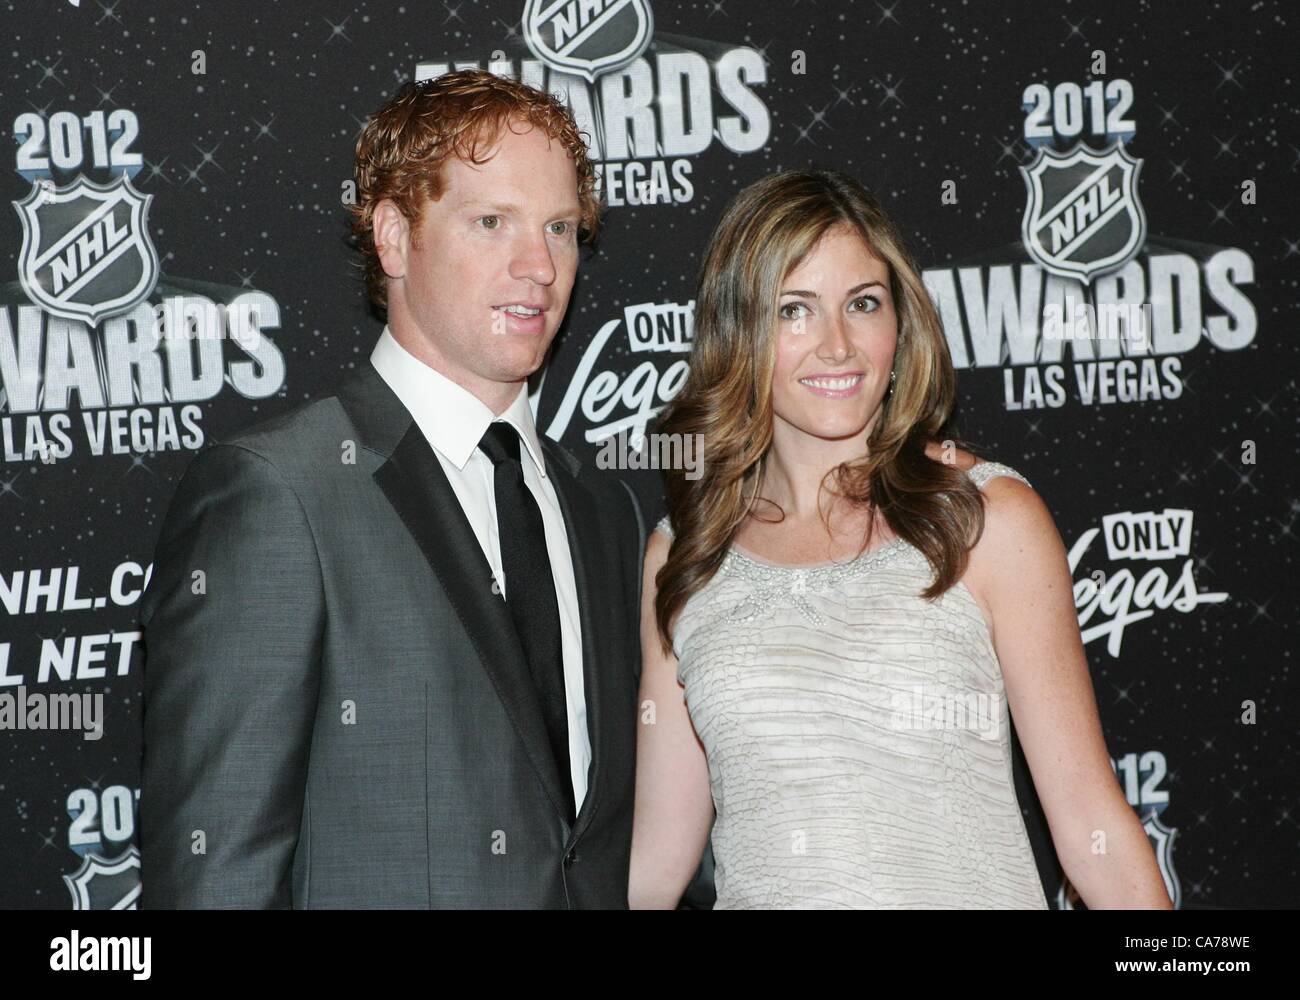 Brian Campbell, Lauren Keene in attendance for 2012 National Hockey League NHL Awards, Encore Theater at the Wynn Las Vegas, Las Vegas, NV June 20, 2012. Photo By: James Atoa/Everett Collection Stock Photo